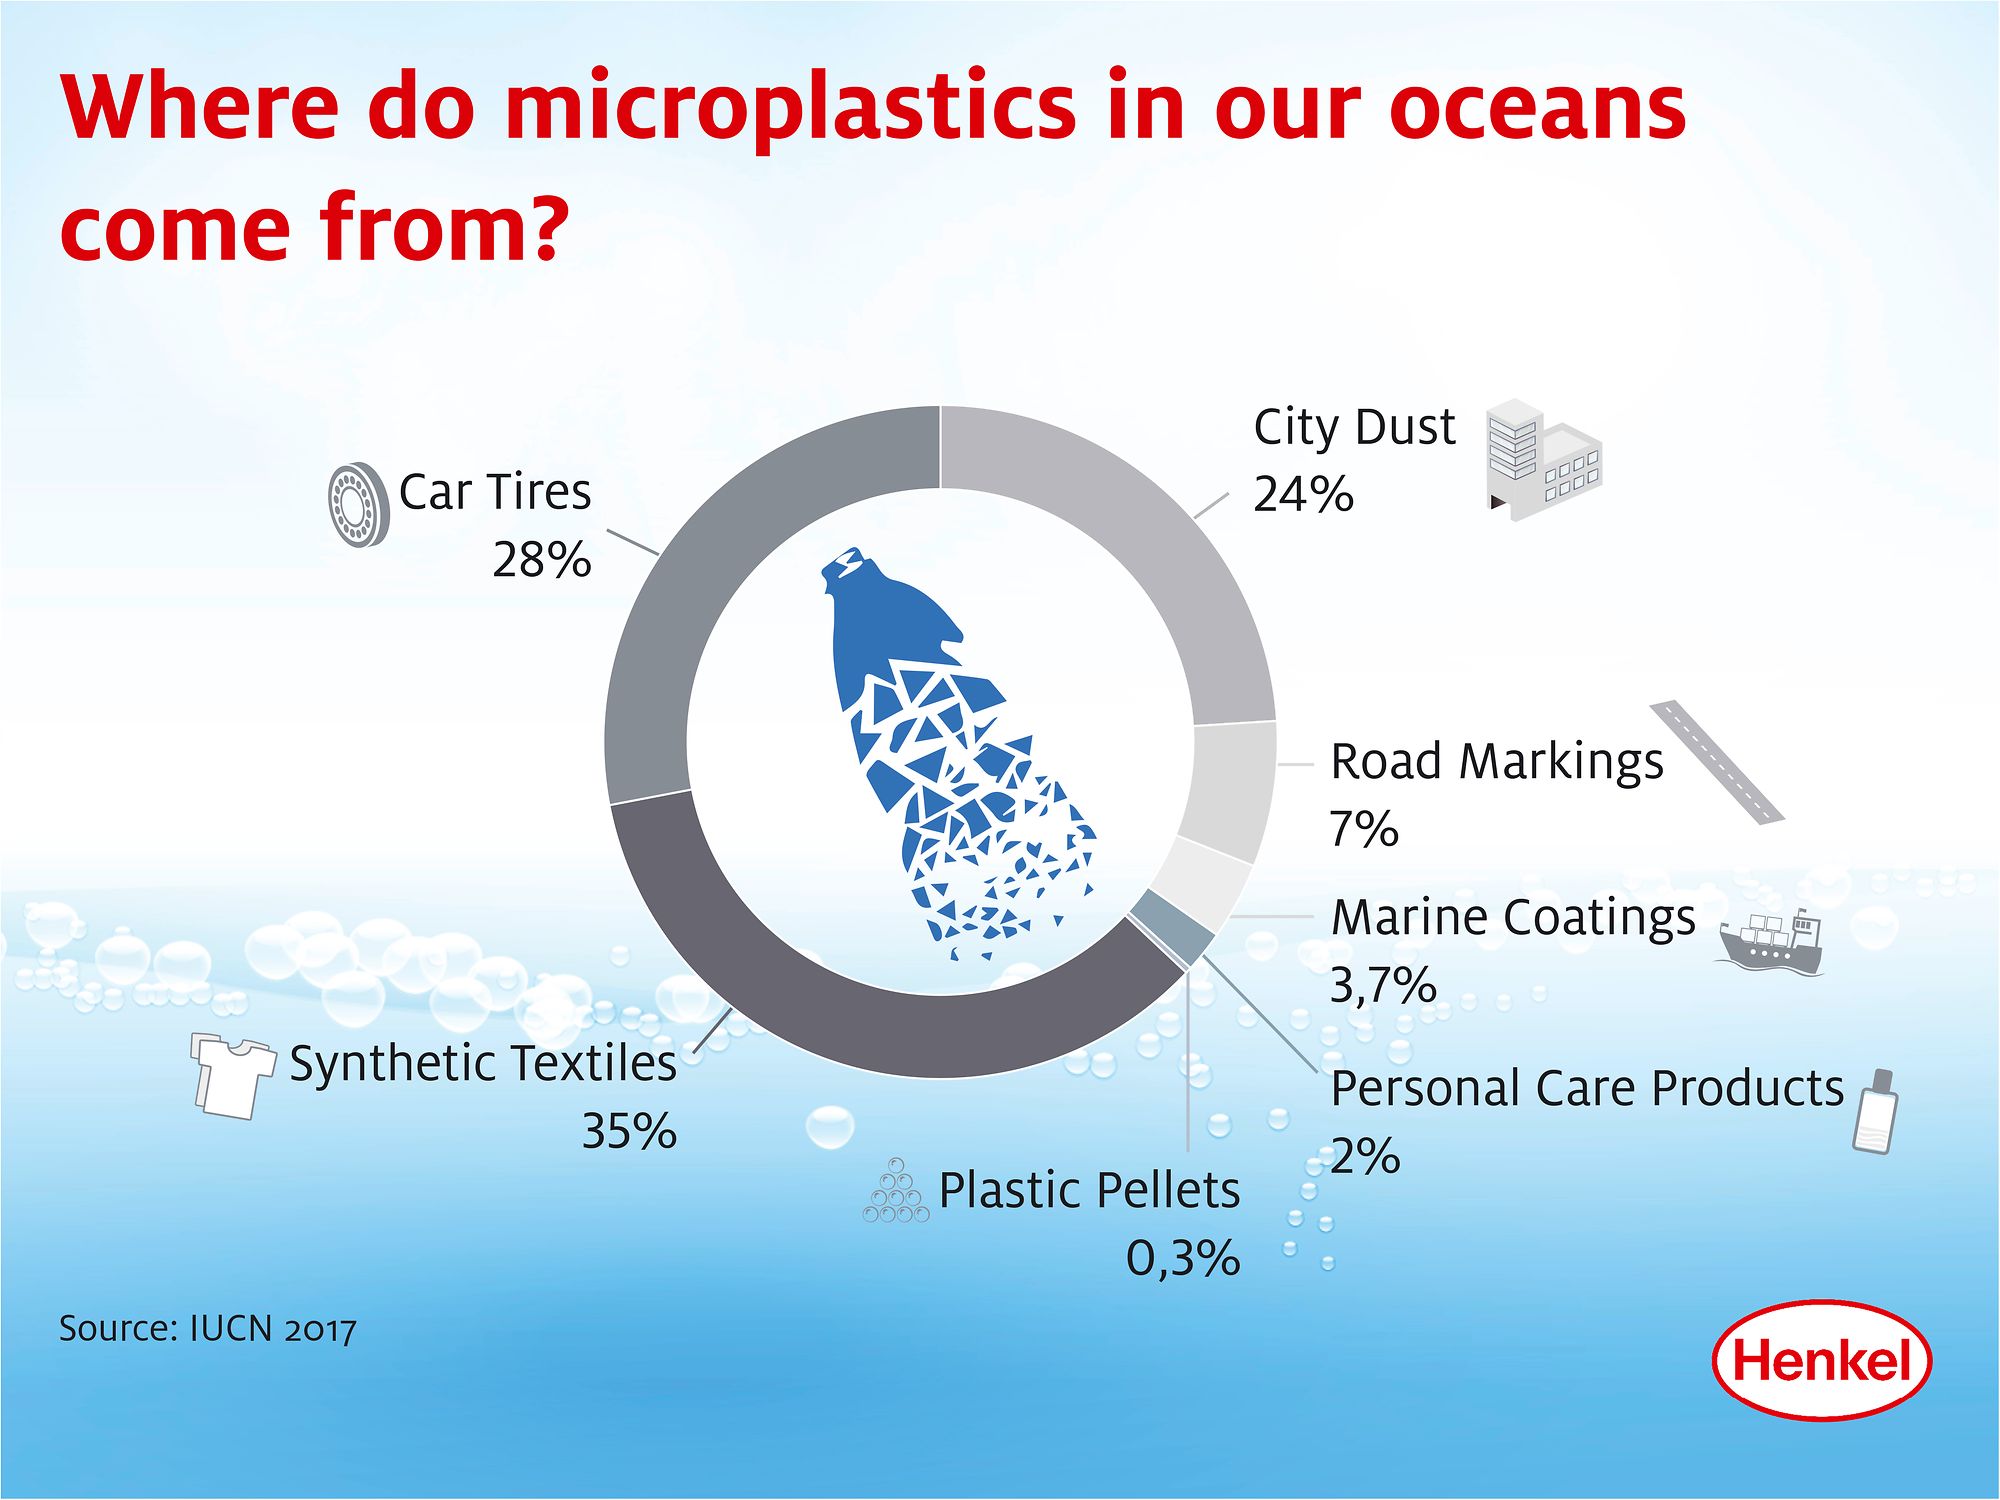 Why are microplastics a problem and what’s the solution?